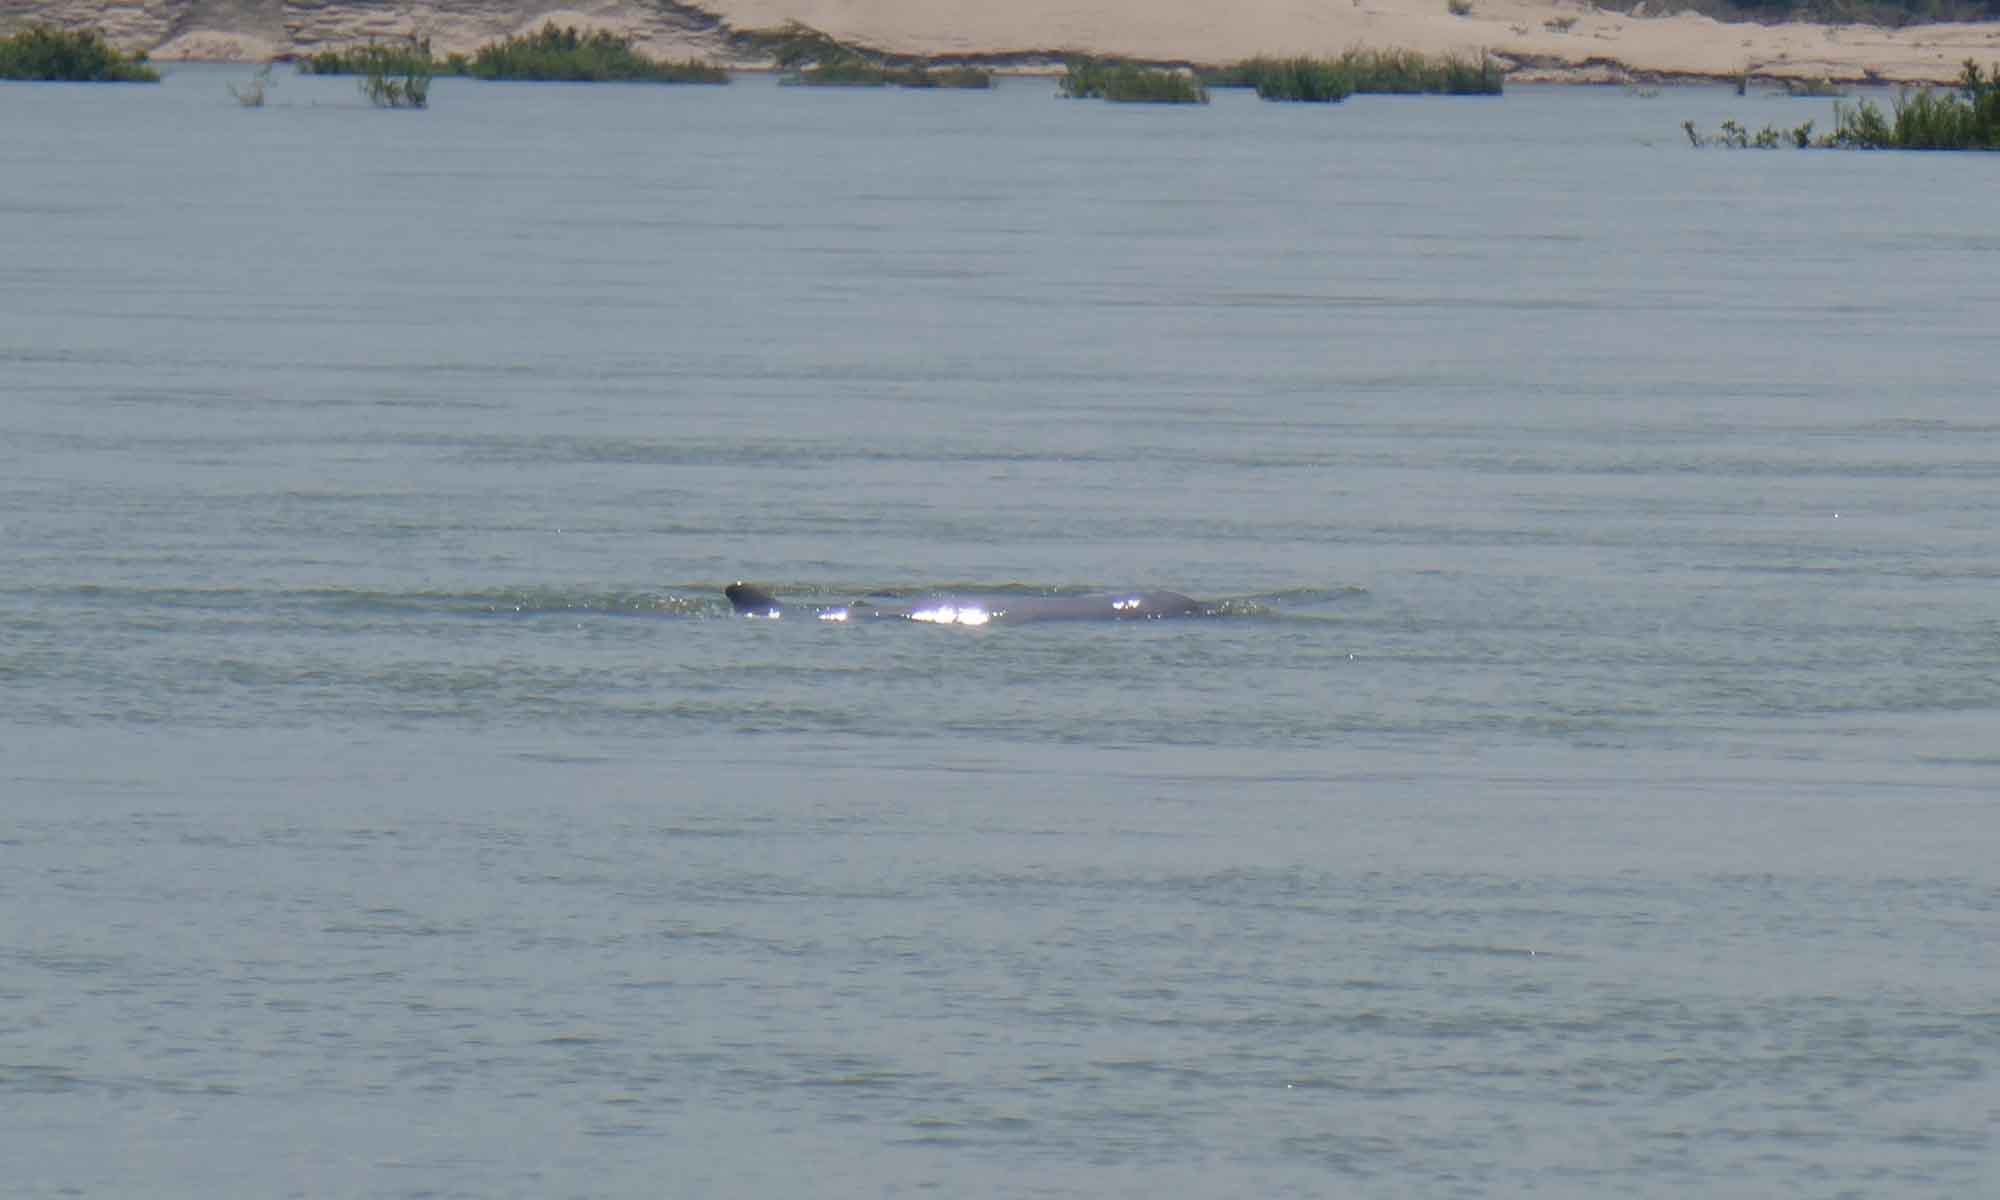 An Irrawaddy dolphin, now you see it - now you don't